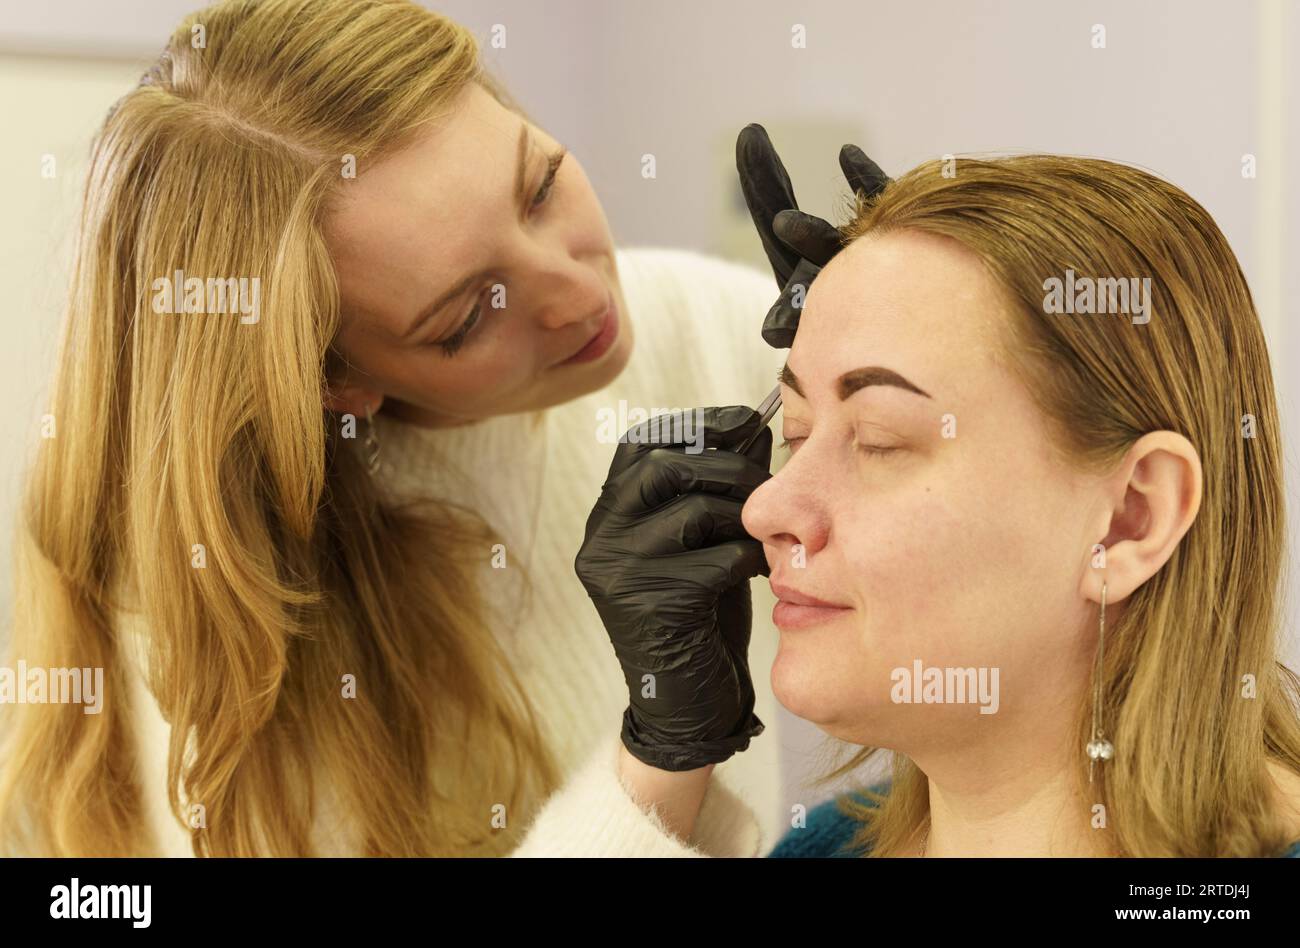 Portrait of a woman having her eyebrows plucked with tweezers in a beauty salon. Beauty industry. Stock Photo